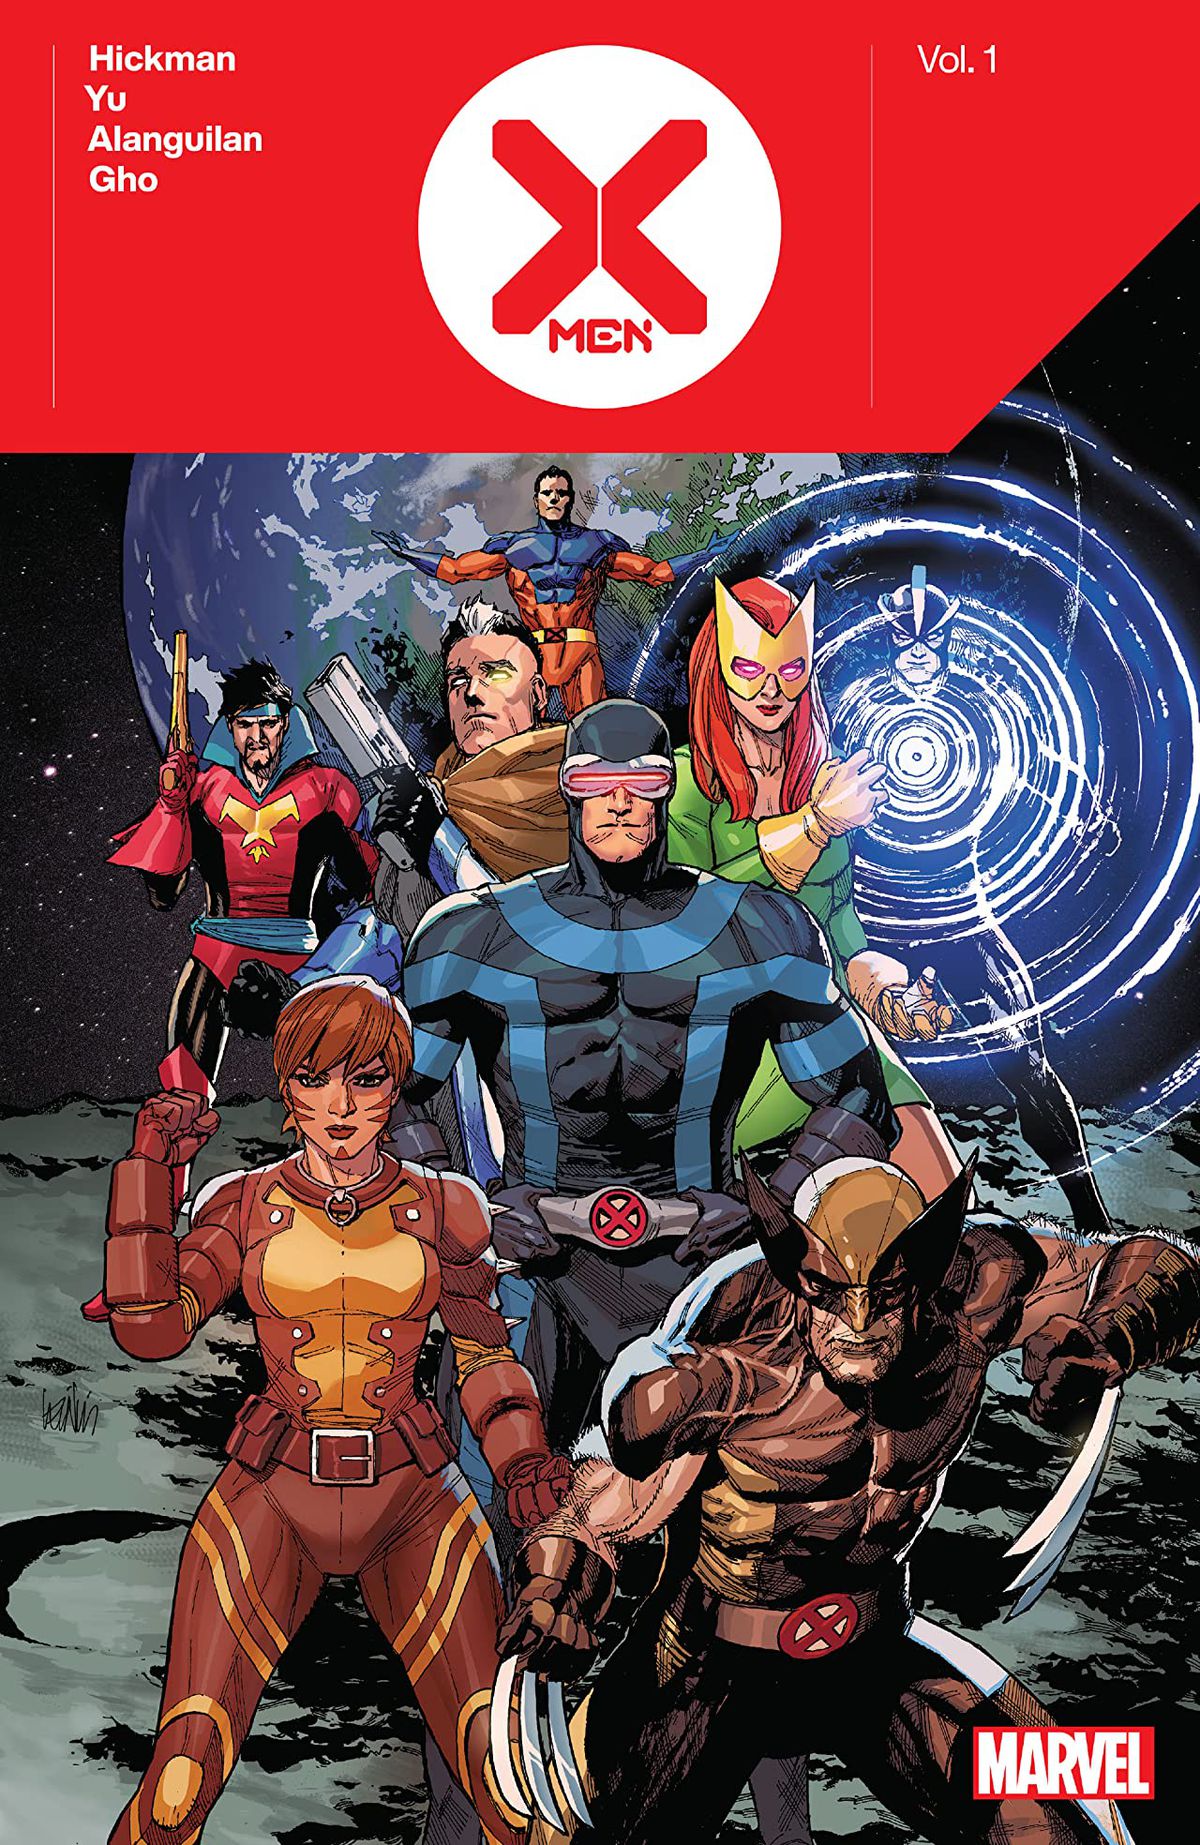 Vulcan, Corsair, Cable, Jean Grey, Havok, Cyclops, Rachel Grey, and Wolverine pose on the moon on the cover of X-Men by Jonathan Hickman Vol. 1 (2020).